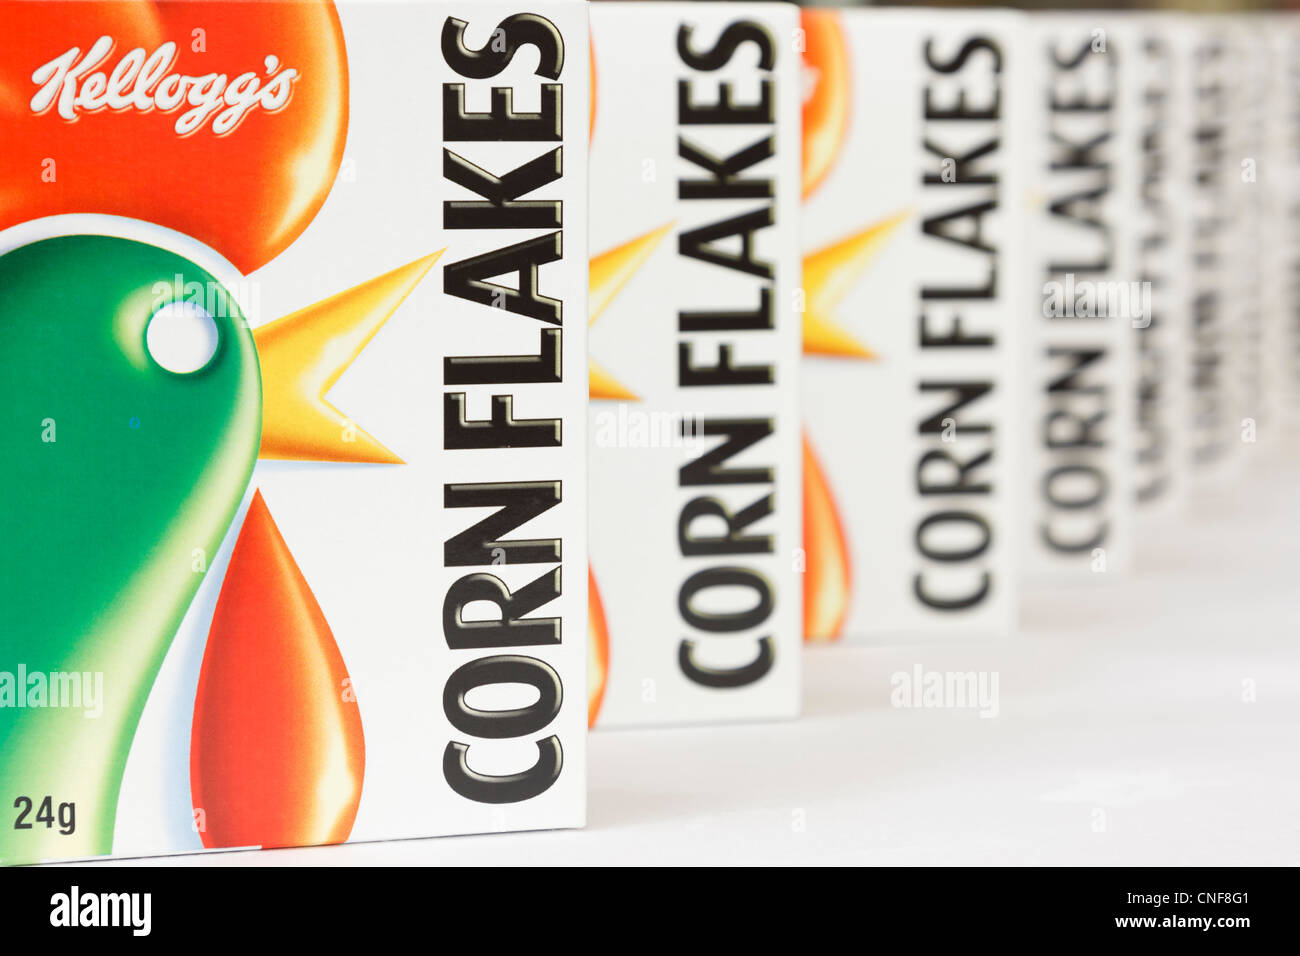 Packets of Kellog's Cornflakes breakfast cereal focused on front box. England UK Stock Photo